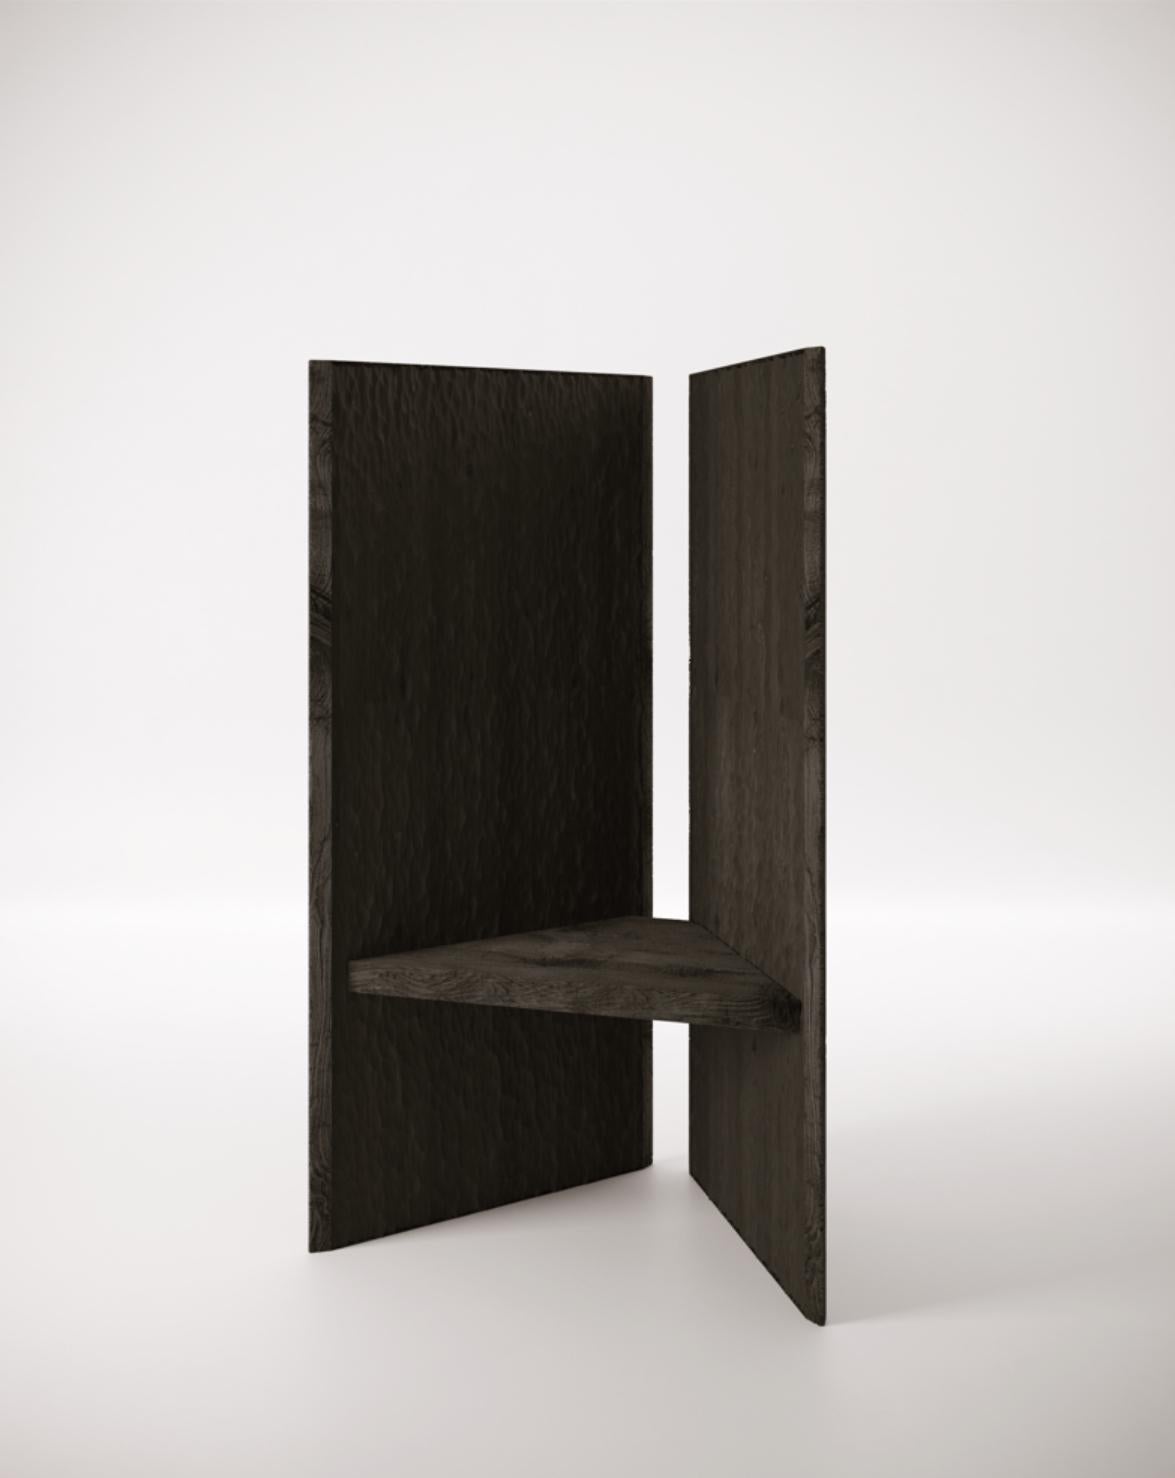 Geb throne by Studiopepe
Dimensions: W 150 x D 90 x H 73 cm
Materials: Black wood

Multifaceted design agency Studiopepe was founded in Milan in 2006. Eclectic, voguish, it is the
brainchild of Chiara di Pinto and Arianna Lelli Mami, both of